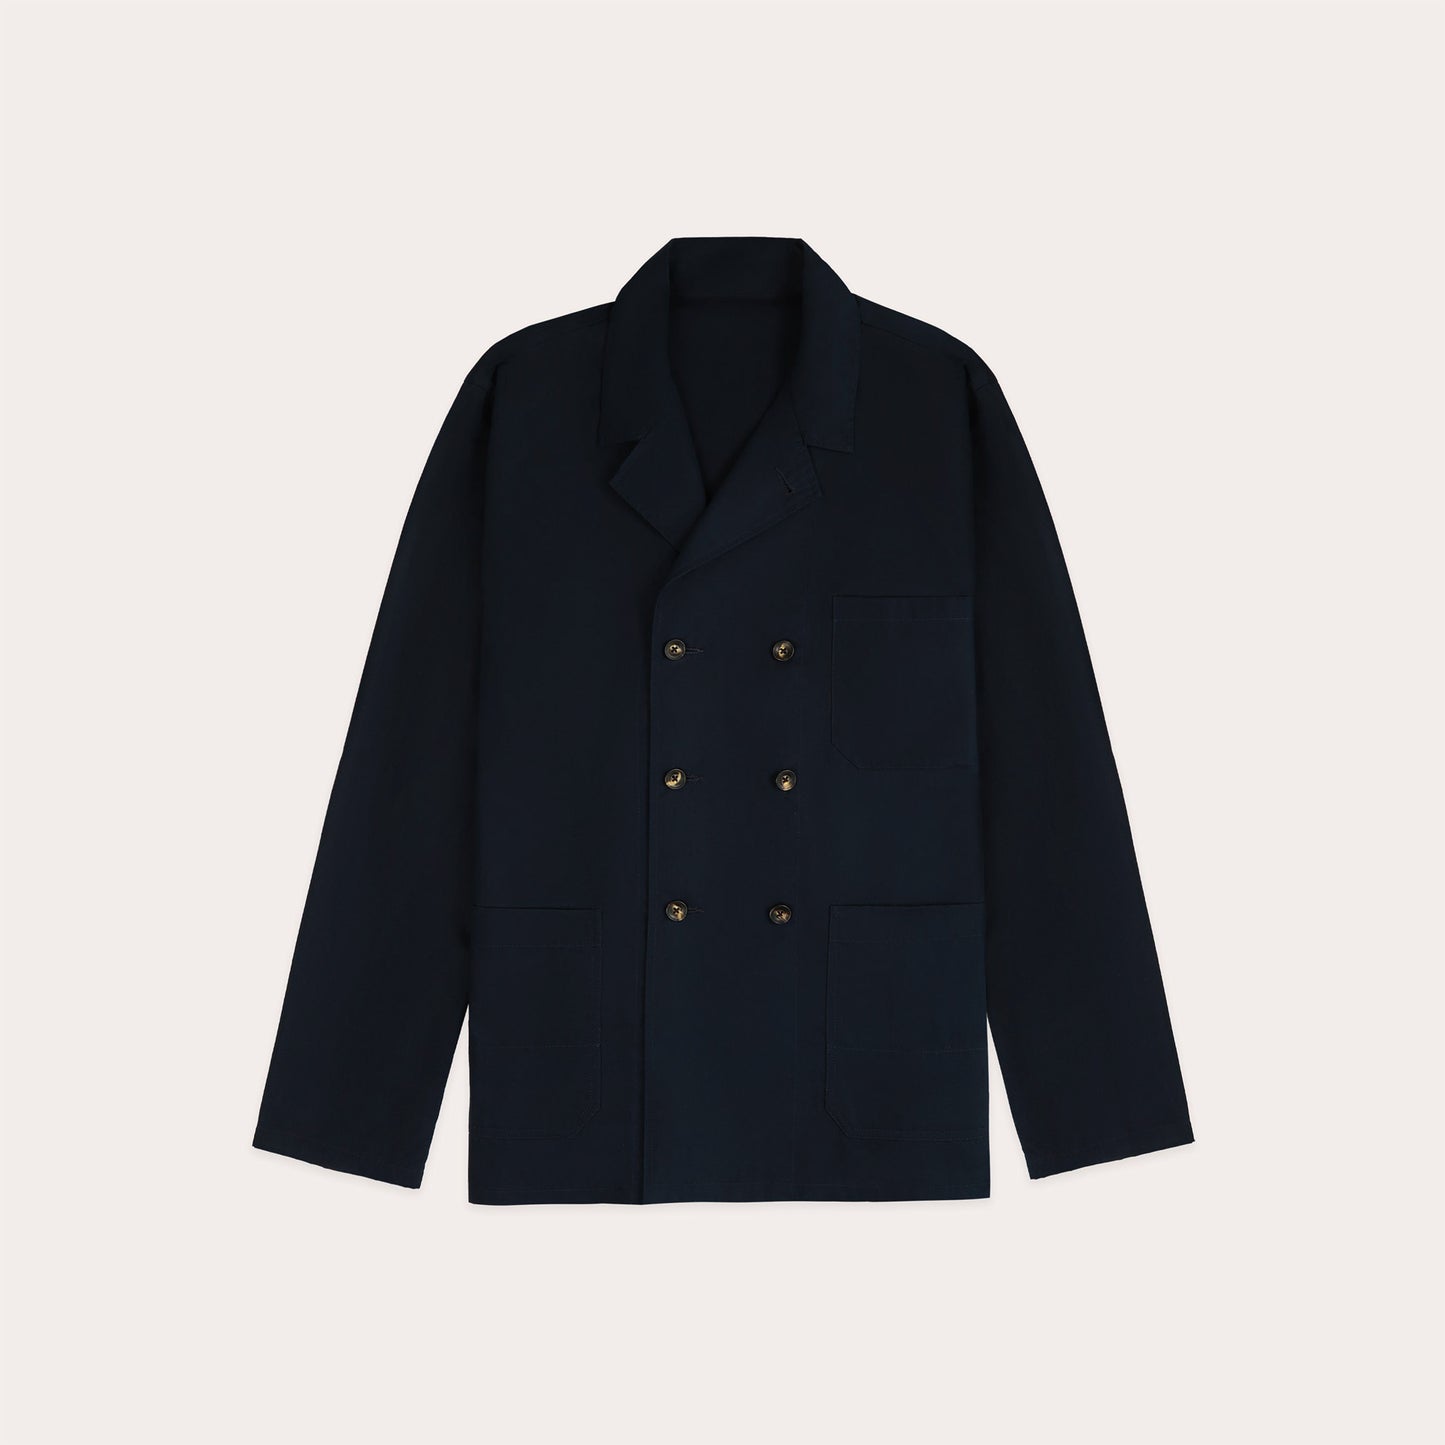 Navy cotton double-breasted work jacket